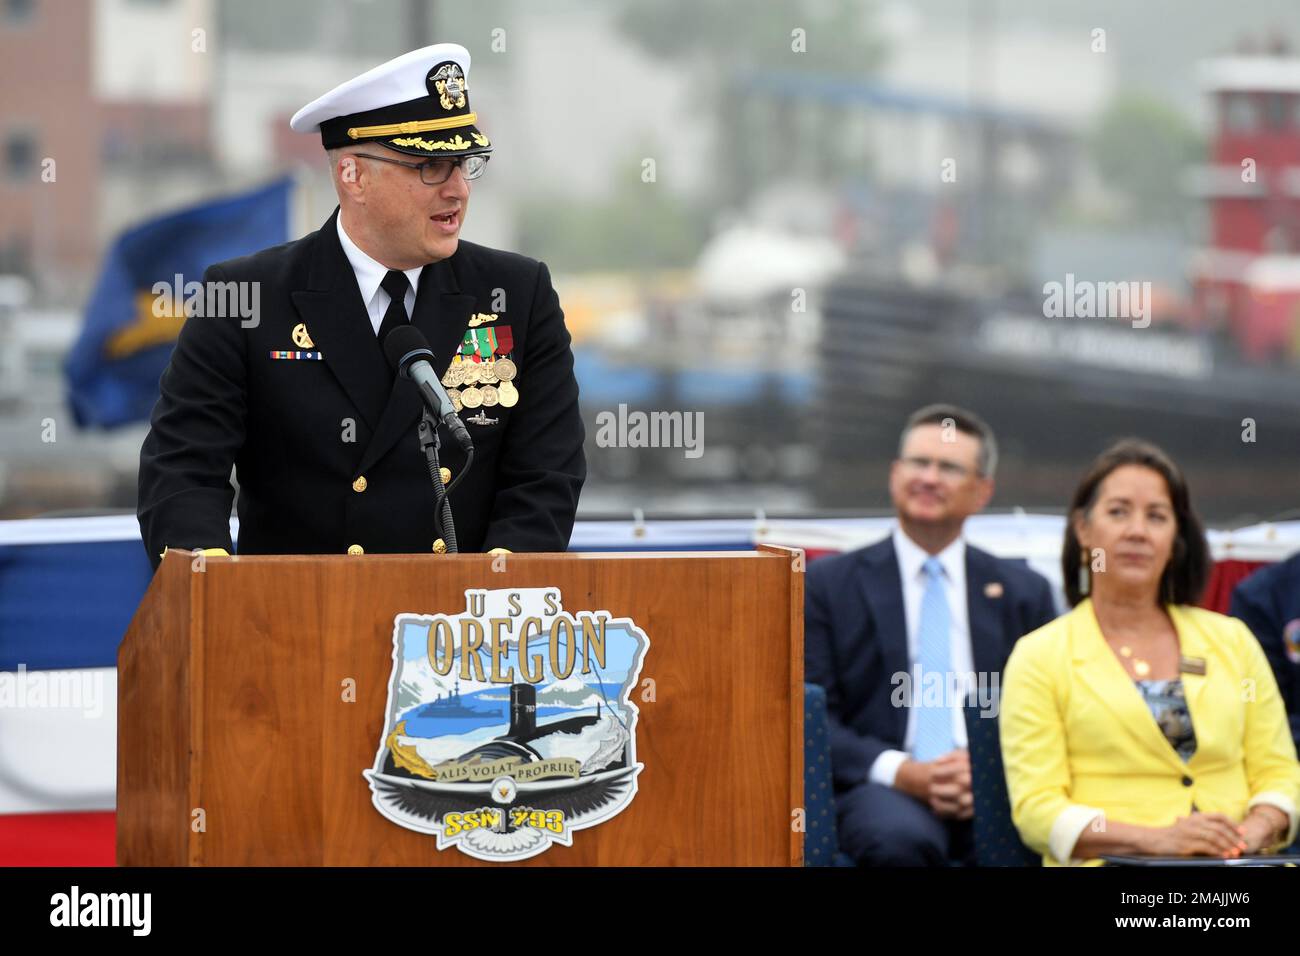 220528-N-GR655-0186 GROTON, Connecticut (May 28, 2022) – Cmdr. Lacy Lodmell, commanding officer of the Virginia-class fast attack submarine USS Oregon (SSN 793), delivers remarks during a commissioning ceremony in Groton, Connecticut May 28, 2022. SSN 793, the third U.S Navy ship launched with the name Oregon and first in more than a century, is a flexible, multi-mission platform designed to carry out the seven core competencies of the submarine force: anti-submarine warfare; anti-surface warfare; delivery of special operations forces; strike warfare; irregular warfare; intelligence, surveilla Stock Photo